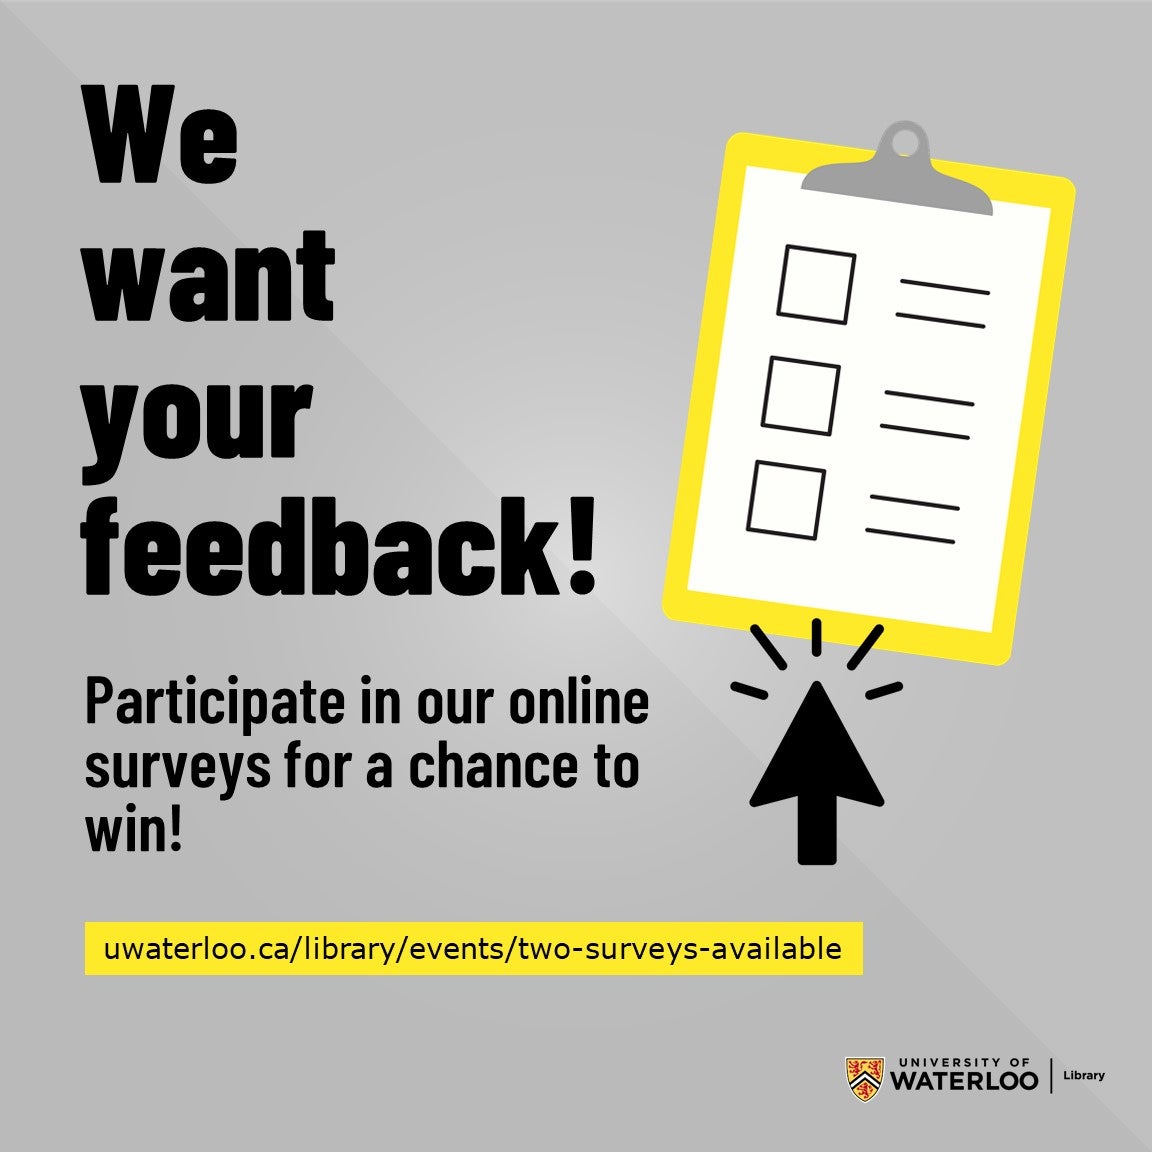 We want your feedback! Participate in our online surveys for a chance to win!